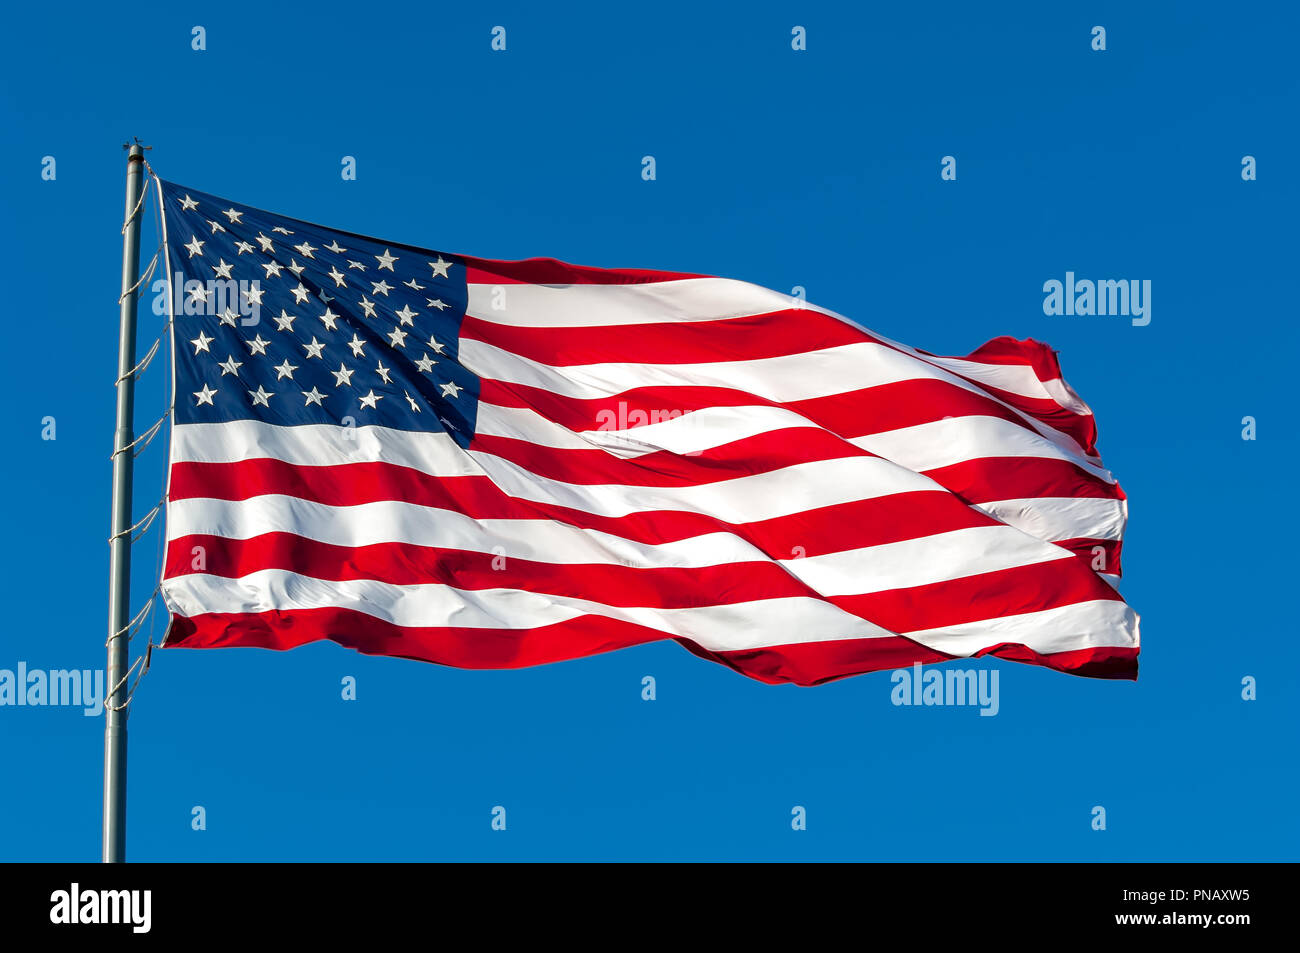 An American flag flying in the breeze against a cloudless bright blue sky. Stock Photo